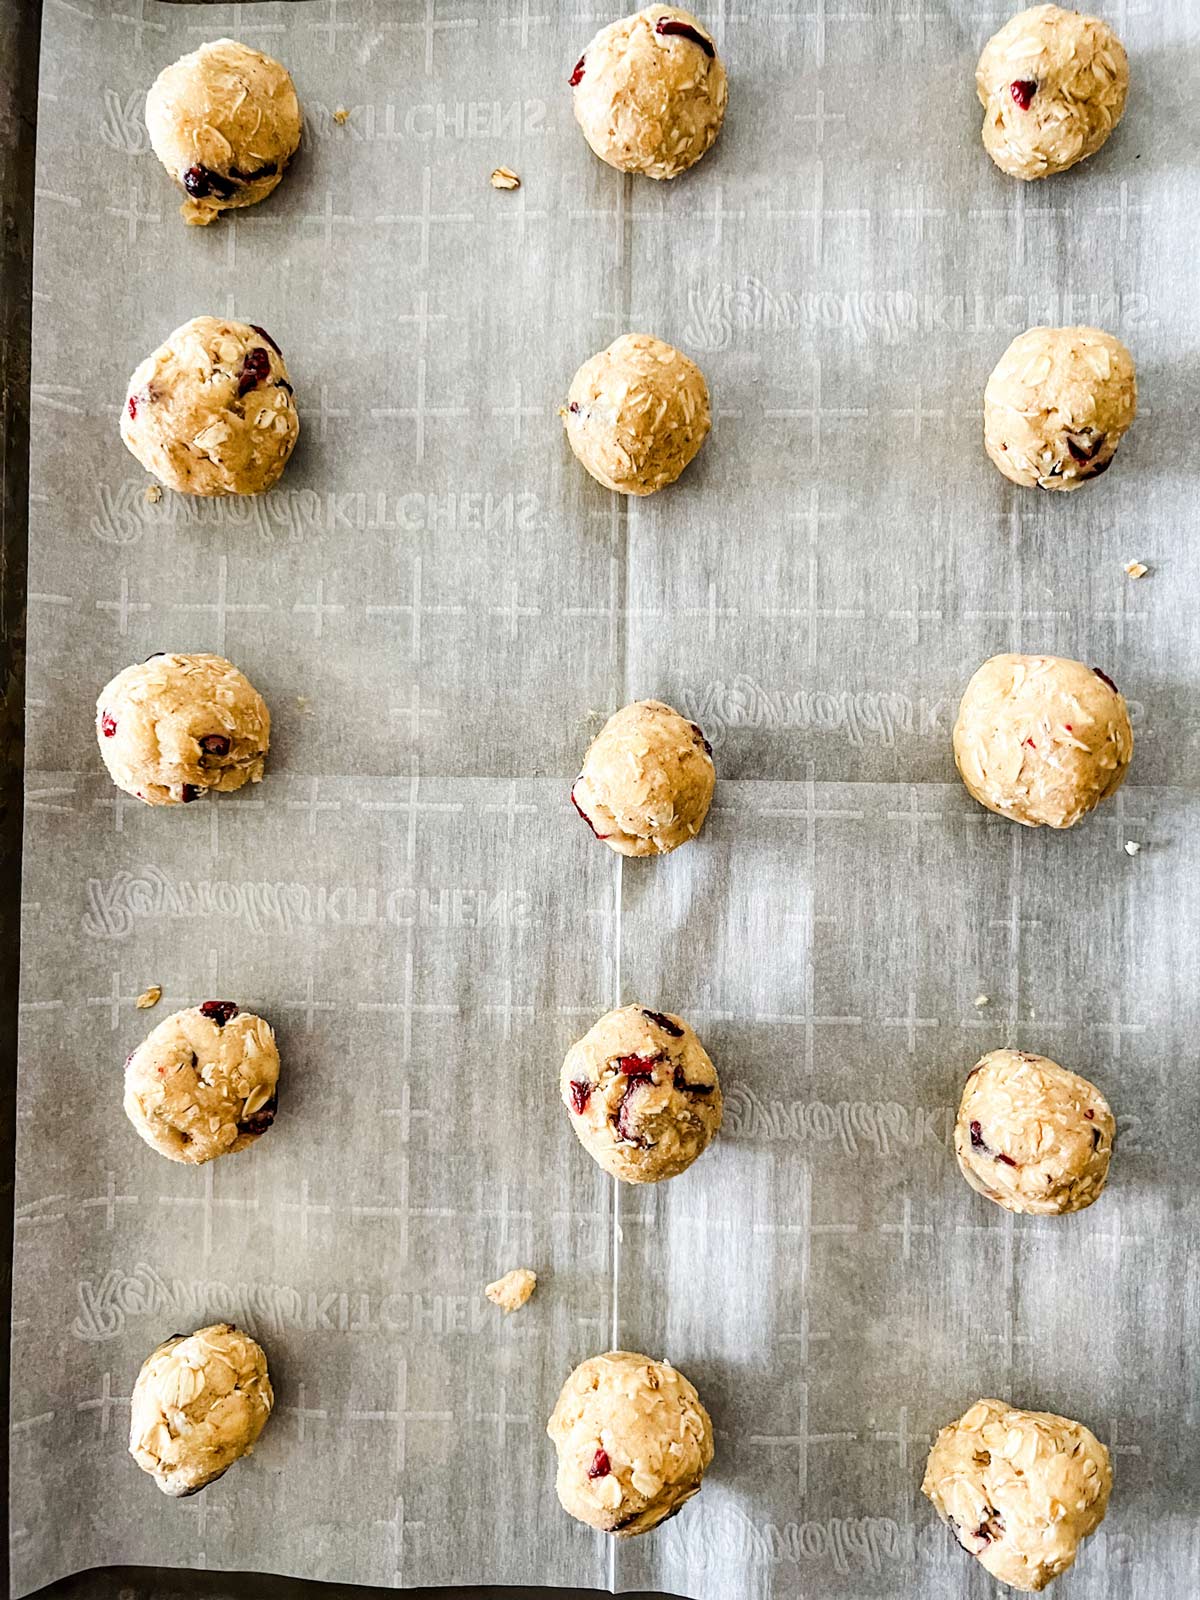 Oatmeal Craisin Cookies rolled into balls.